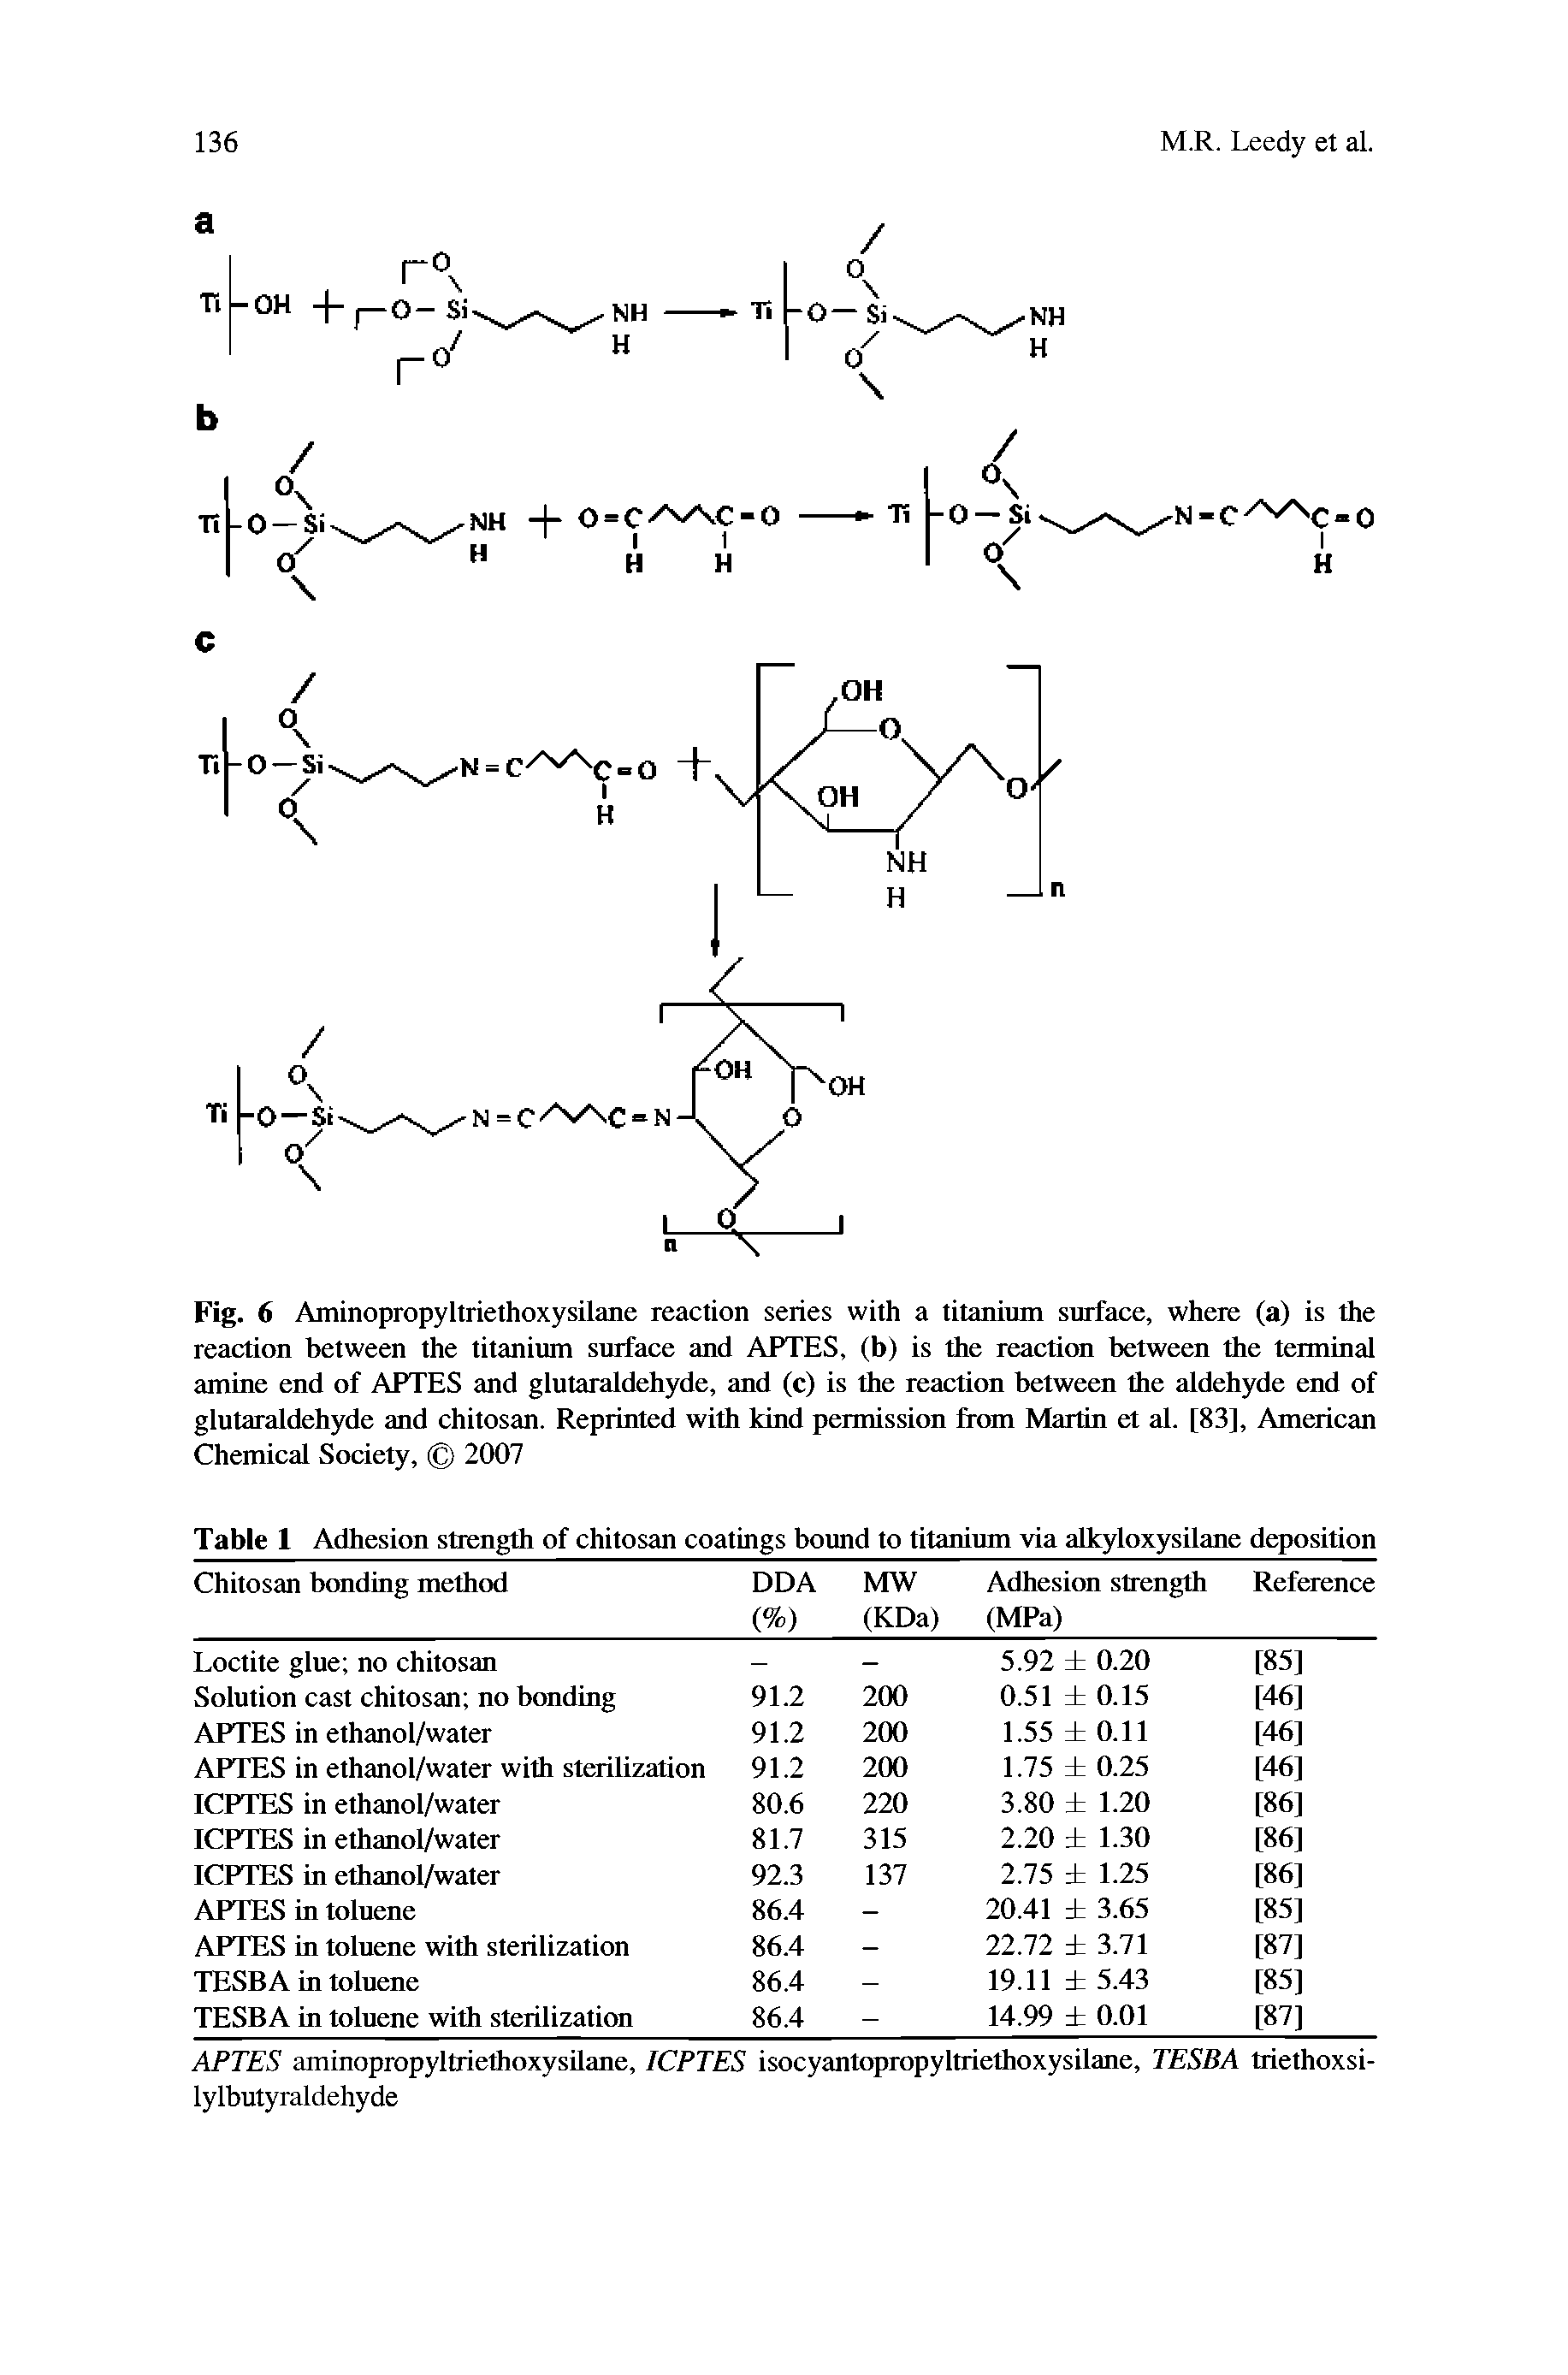 Table 1 Adhesion strength of chitosan coatings bound to titanium via alkyloxysilane deposition...